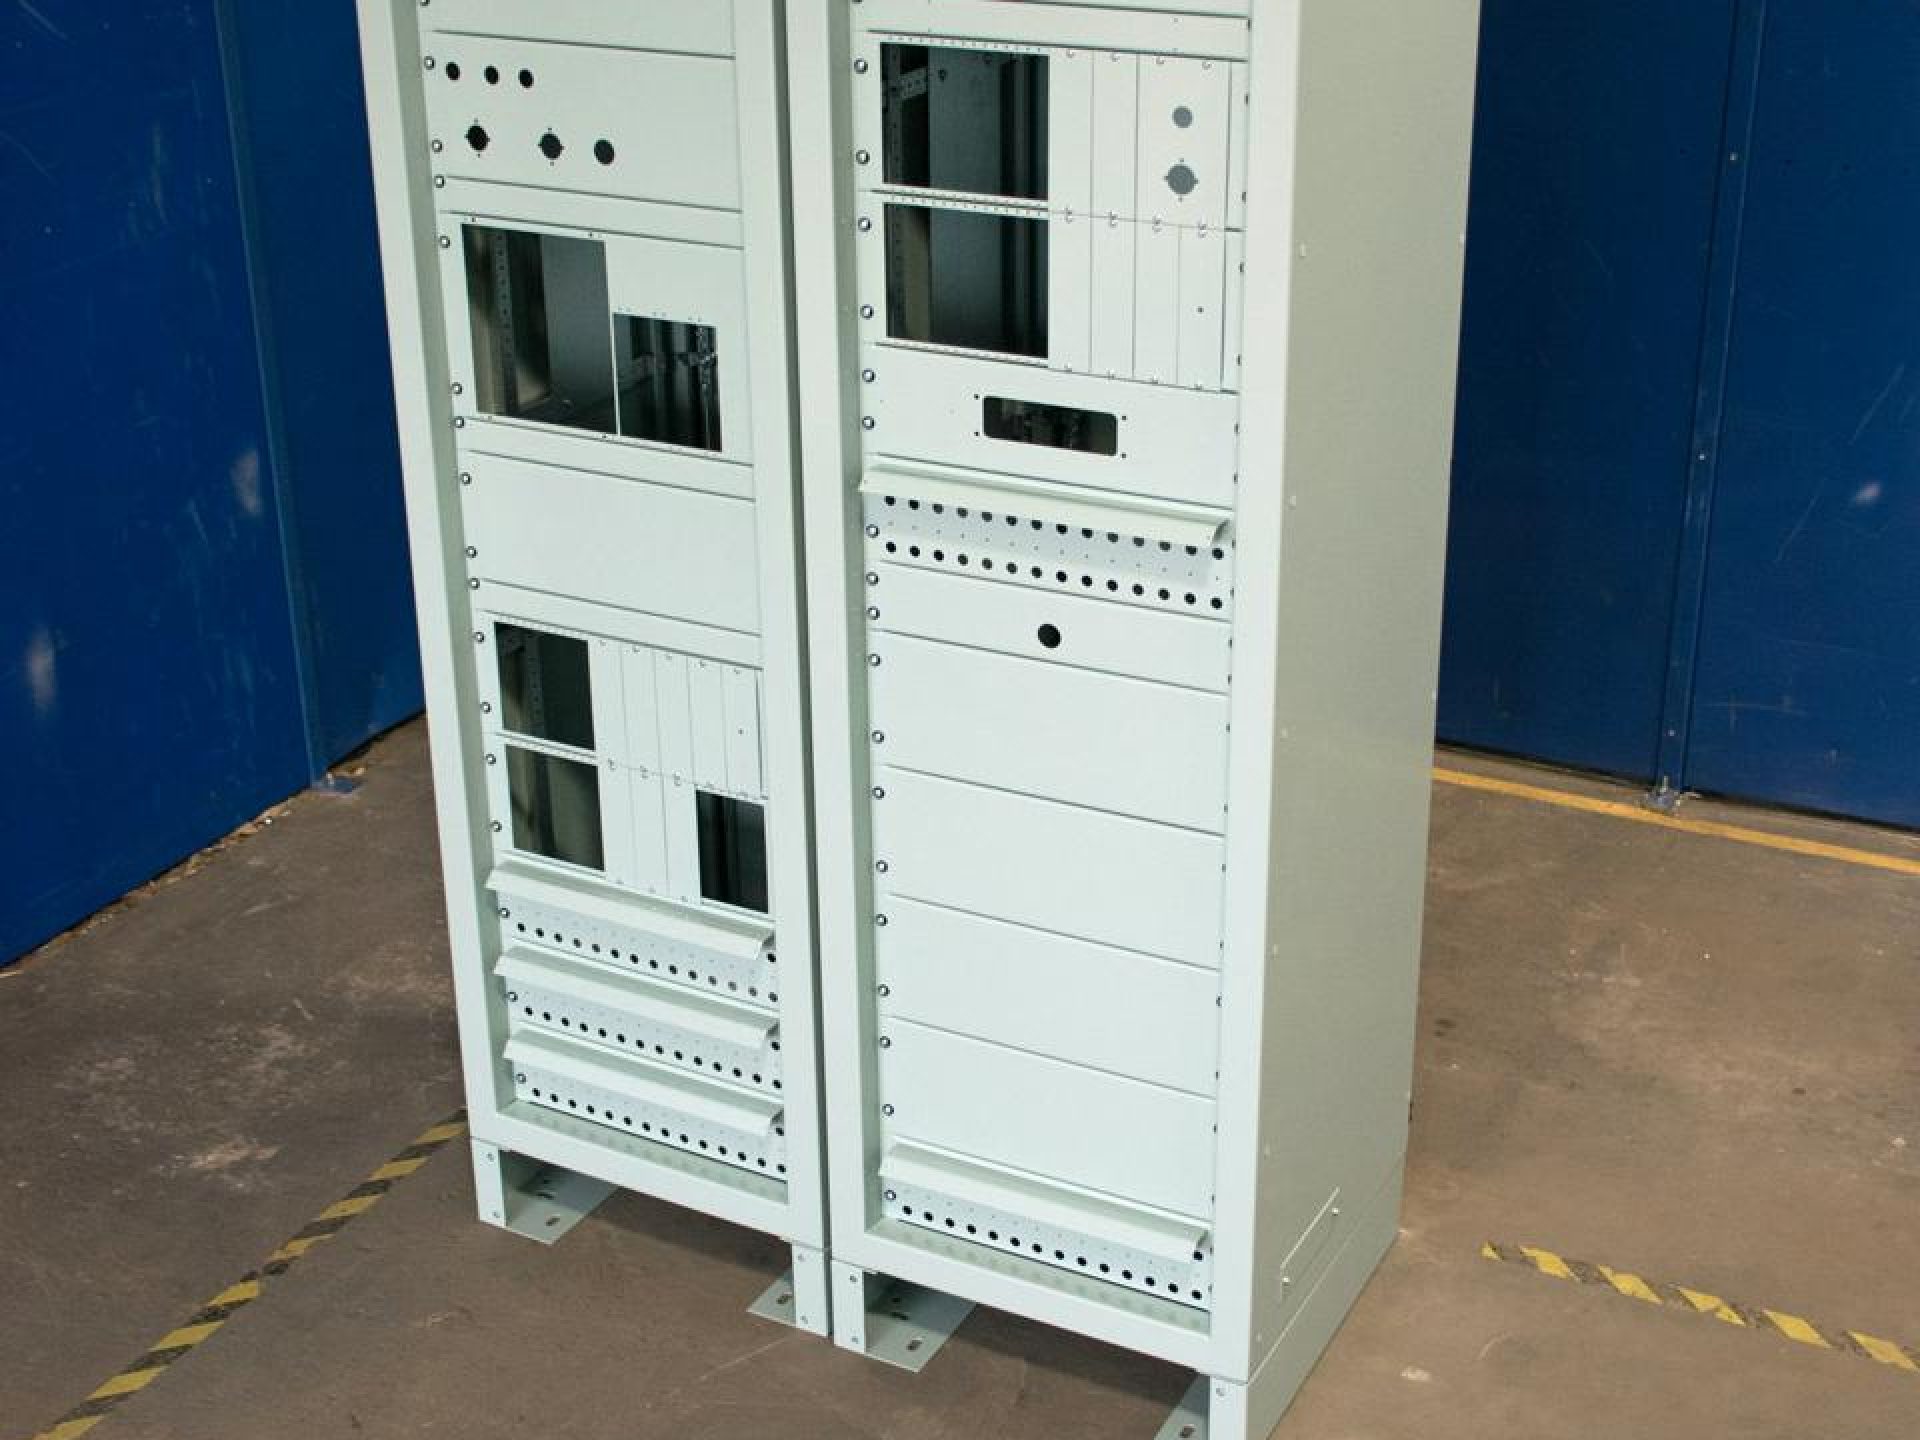 HV Protection Panel by Adams Enclosures